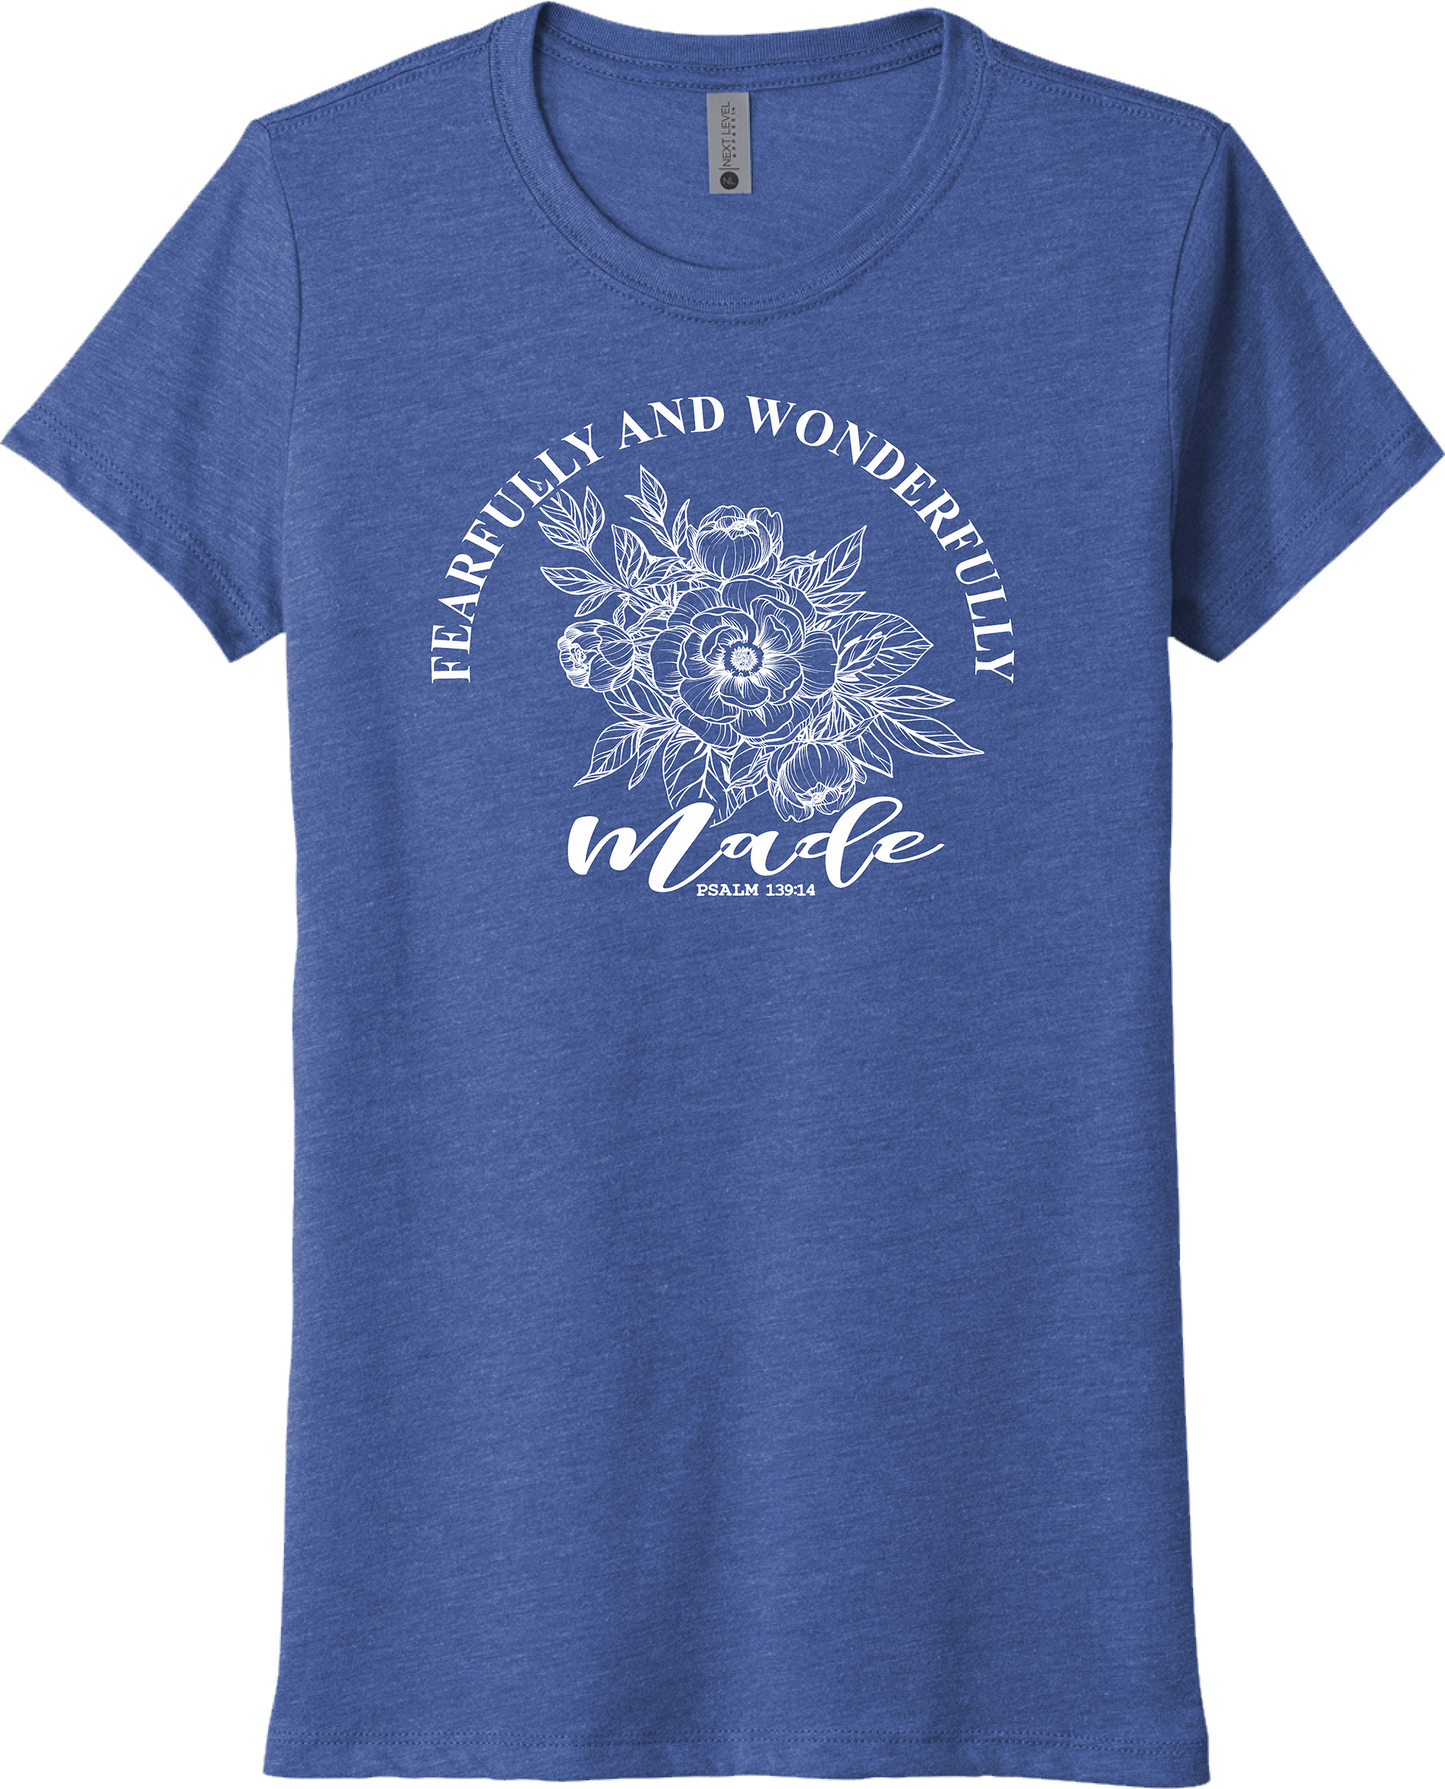 Fearfully and Wonderfully Made Design on Vintage Blue T-Shirt